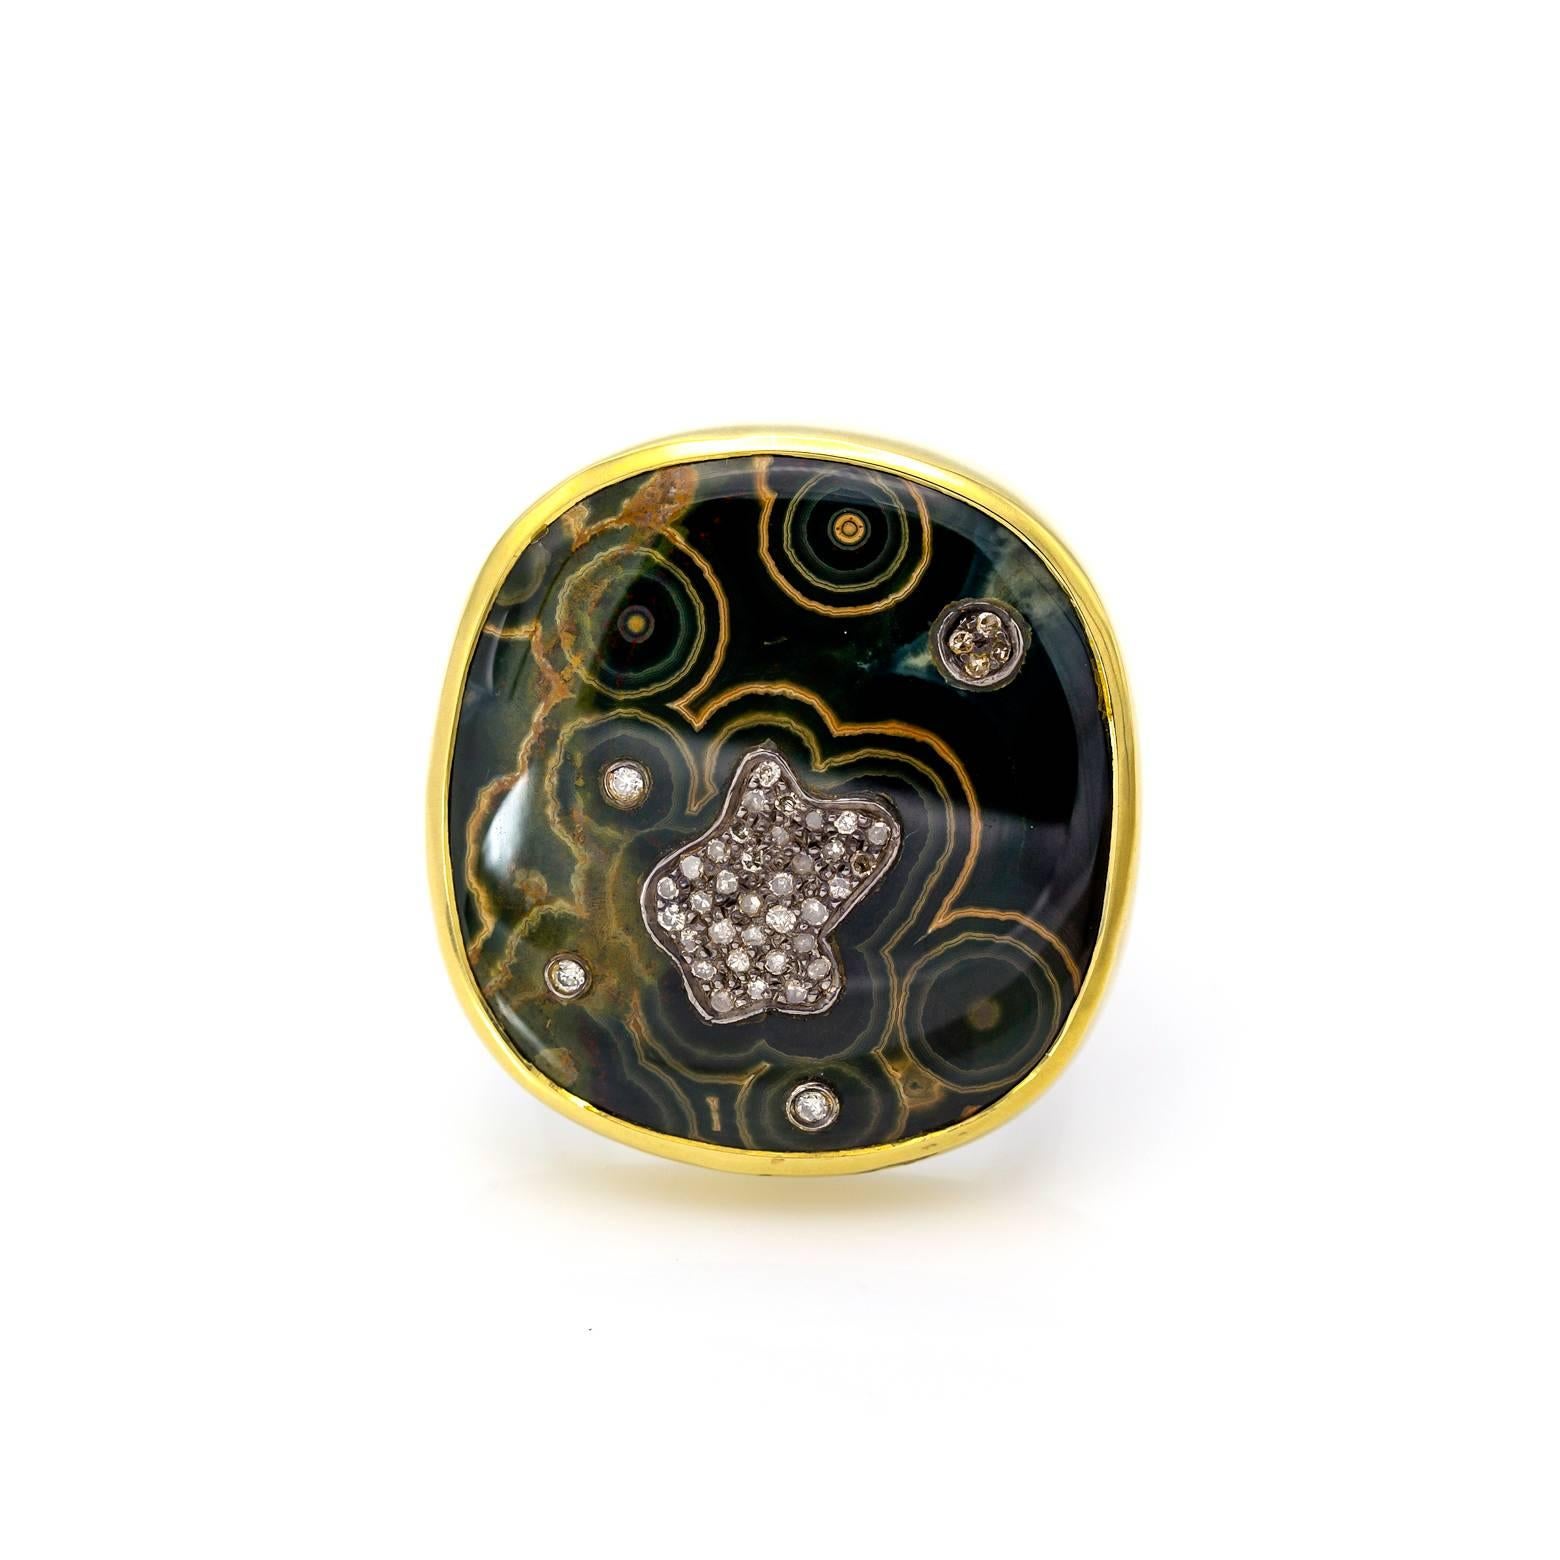 A statement ring of deep forest greens and natural concentric circles! This organic and natural ring is embellished with pave diamonds, an 18K yellow gold bezel and sterling silver band. A magical piece that brings the imagination into the depths of